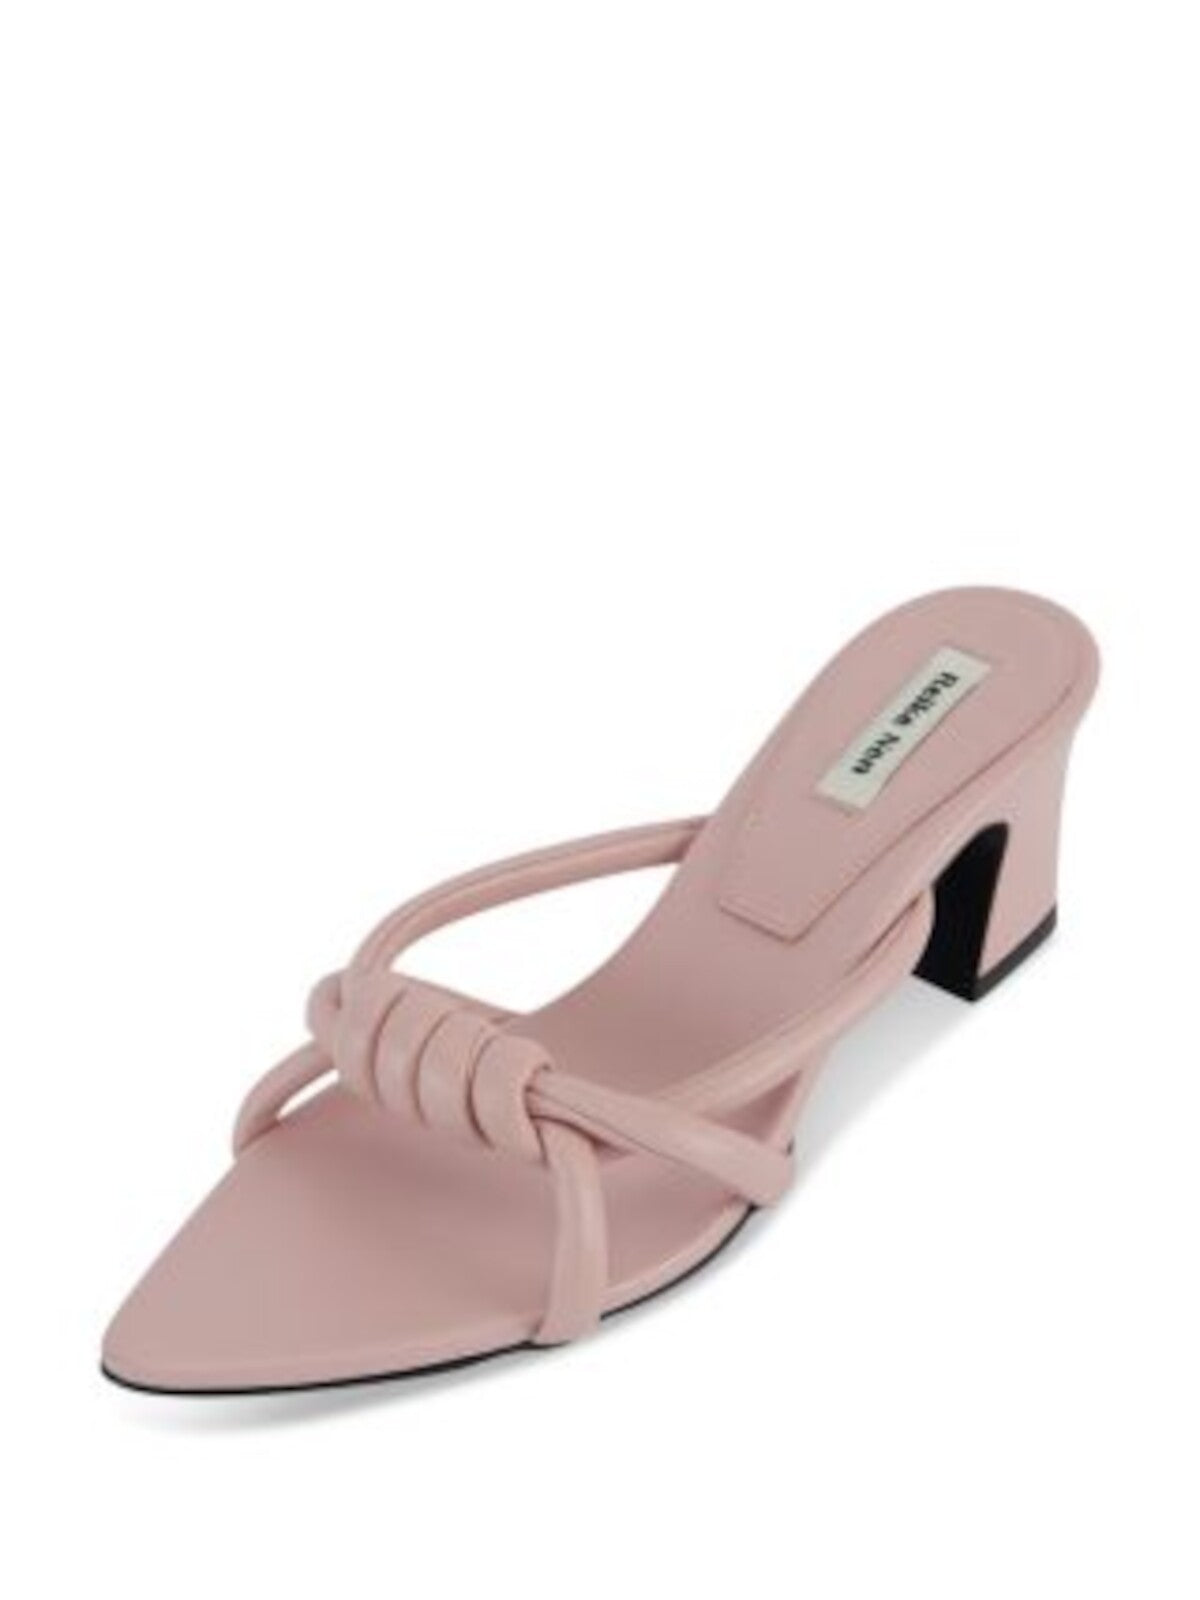 REIKE NEN Womens Pink Knotted Strap Logo Footbed Logo Rn3sh006 Pointed Toe Block Heel Slip On Leather Heeled Sandal 38